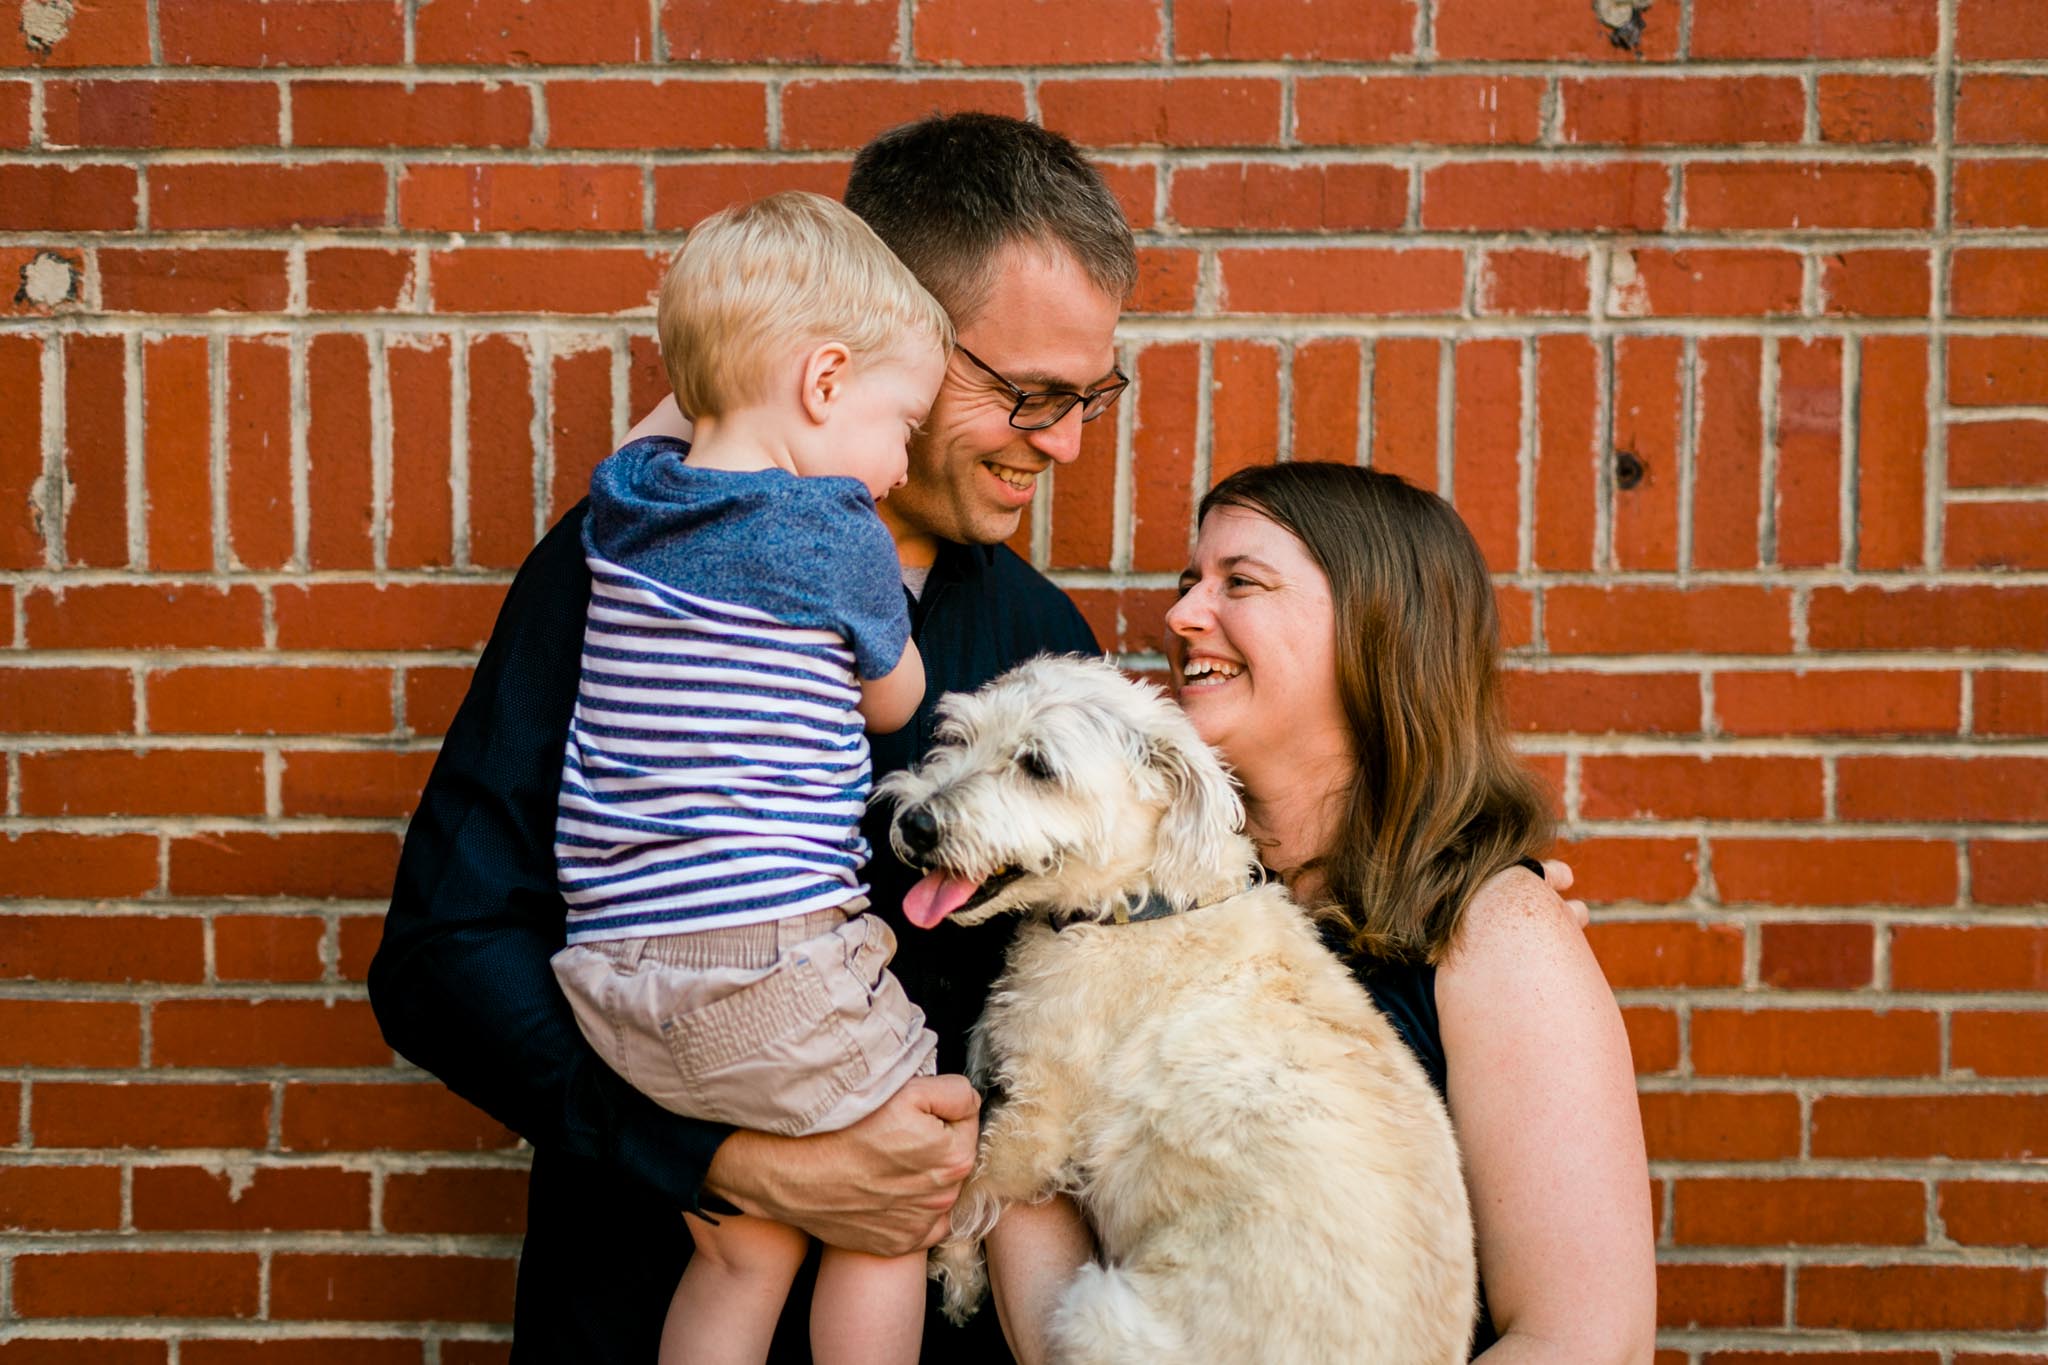 Durham Family Photographer | By G. Lin Photography | Outdoor family portrait at American Tobacco Campus